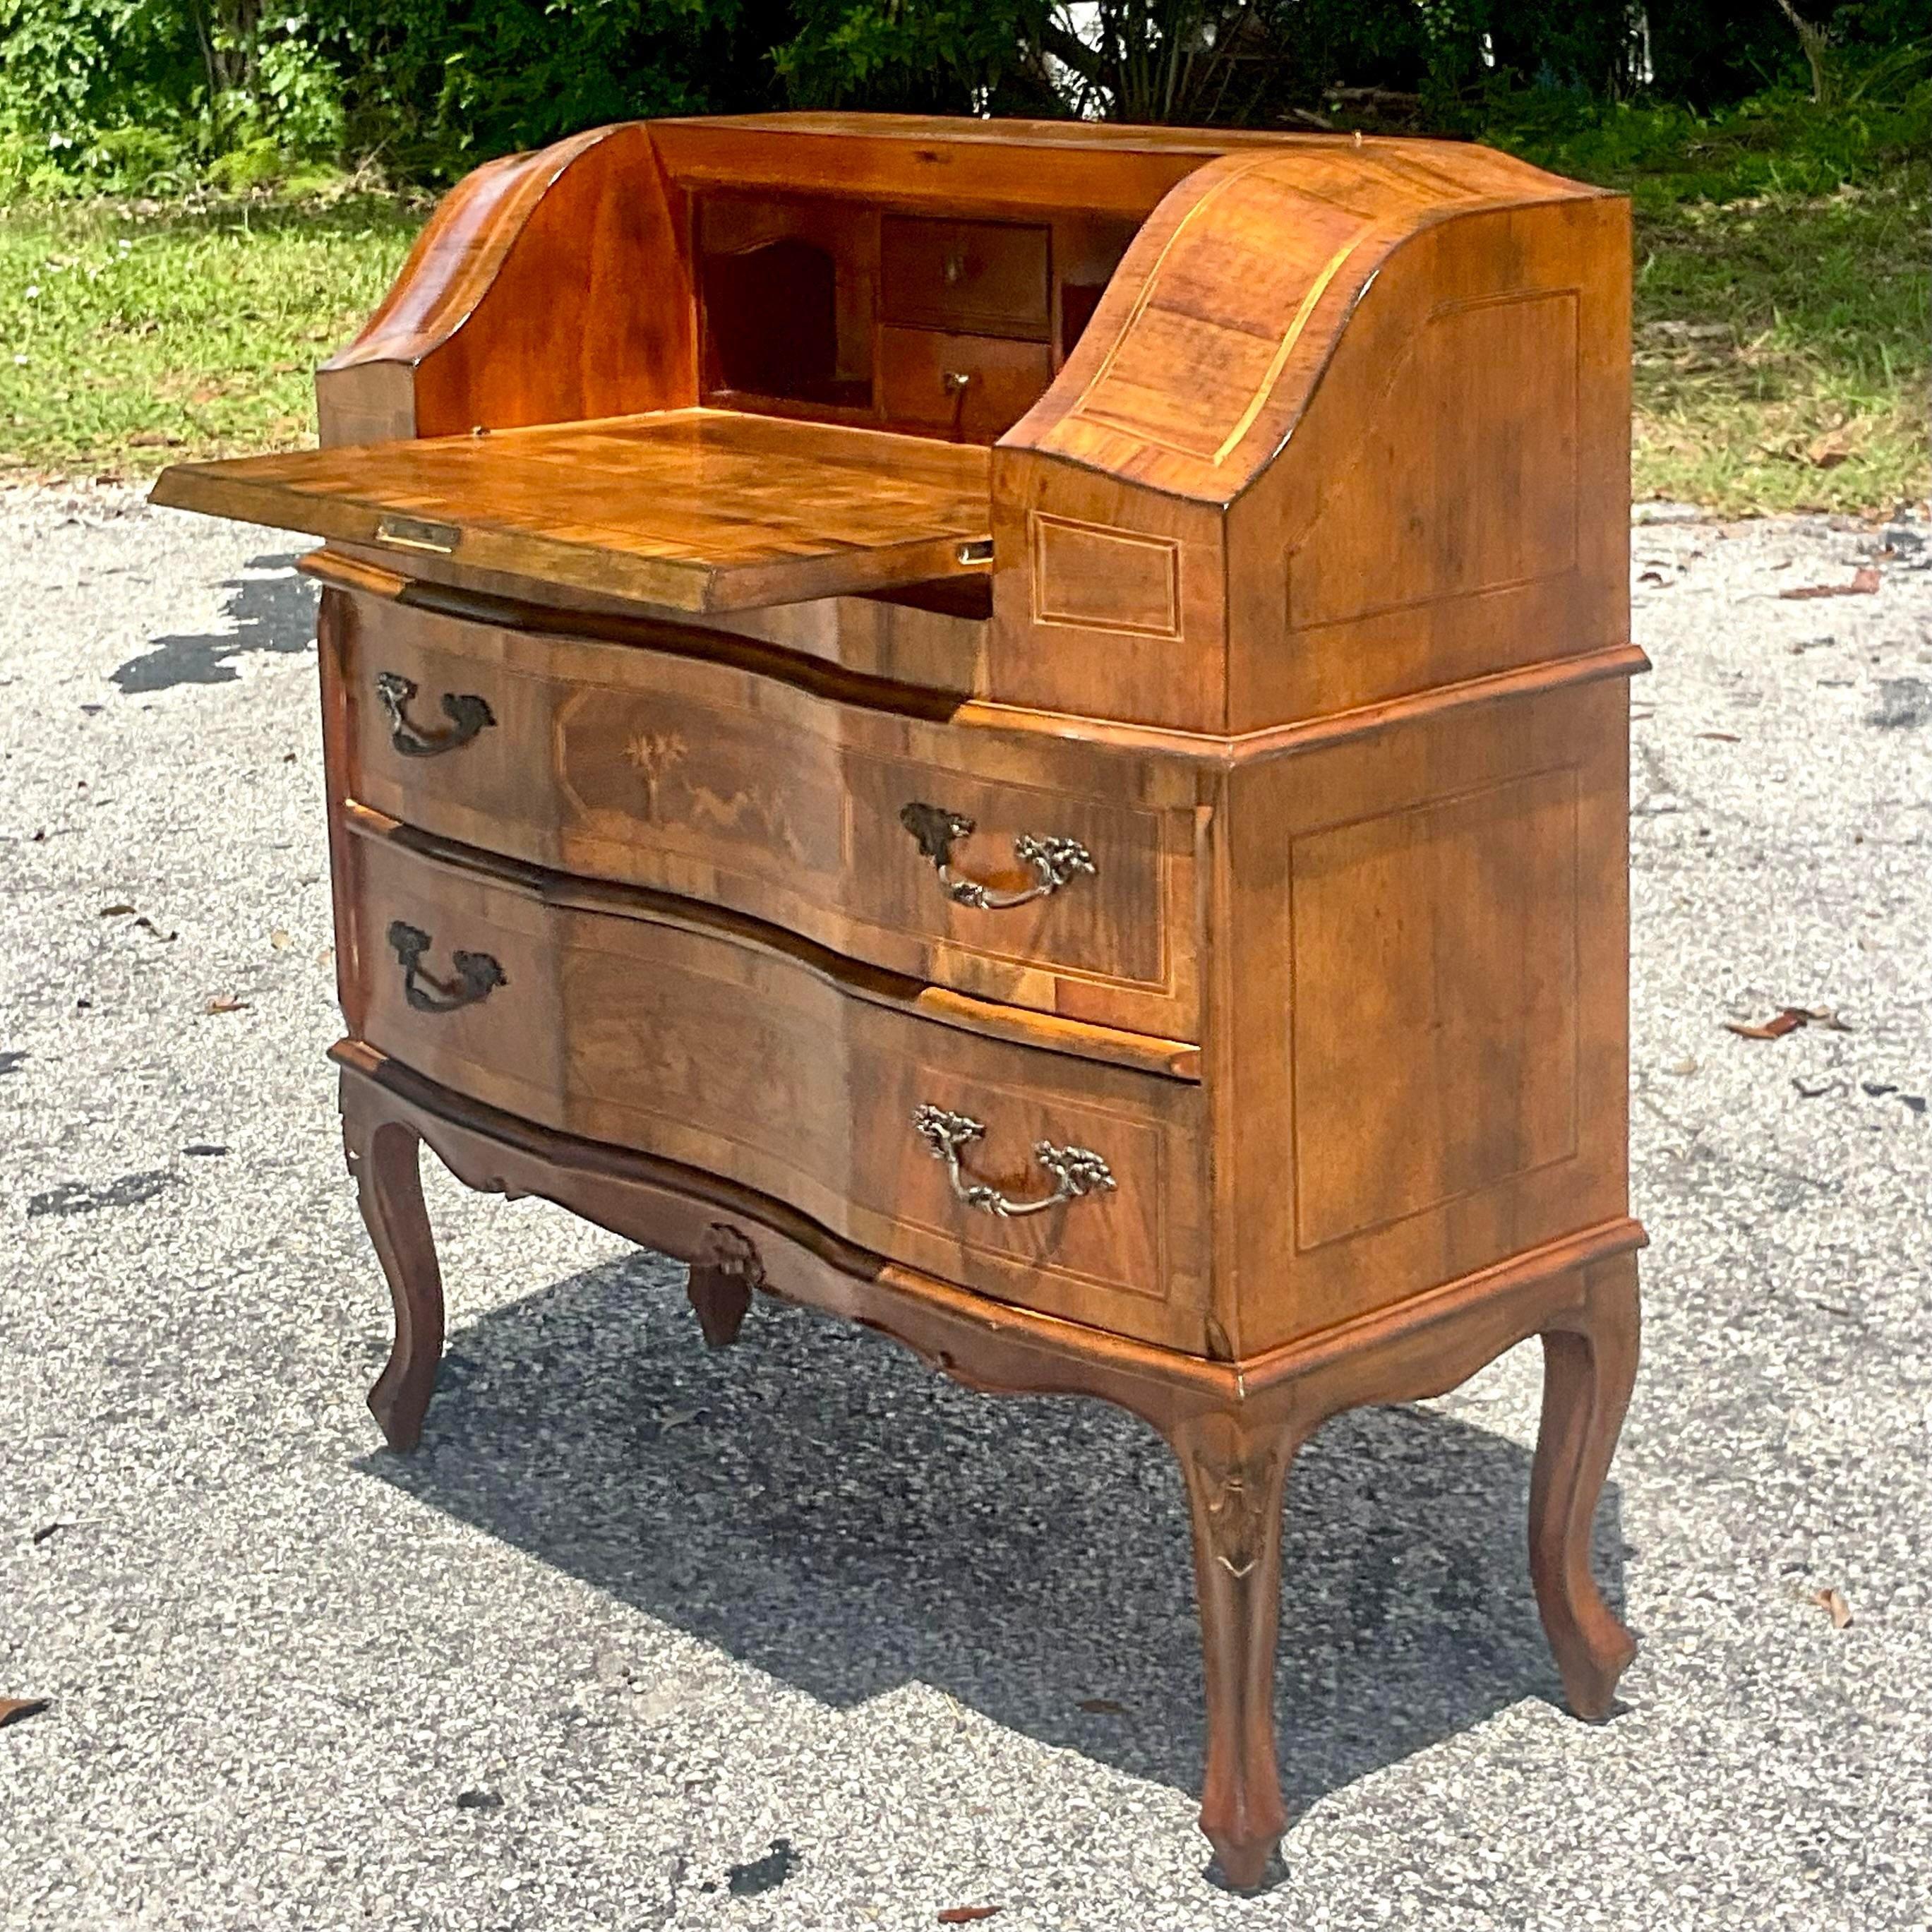 A fabulous vintage Boho Italian writing desk. Chic animal marquetry construction with incredible attention to detail. Drop top writing surface reveals lots of little interior drawers and cabinets